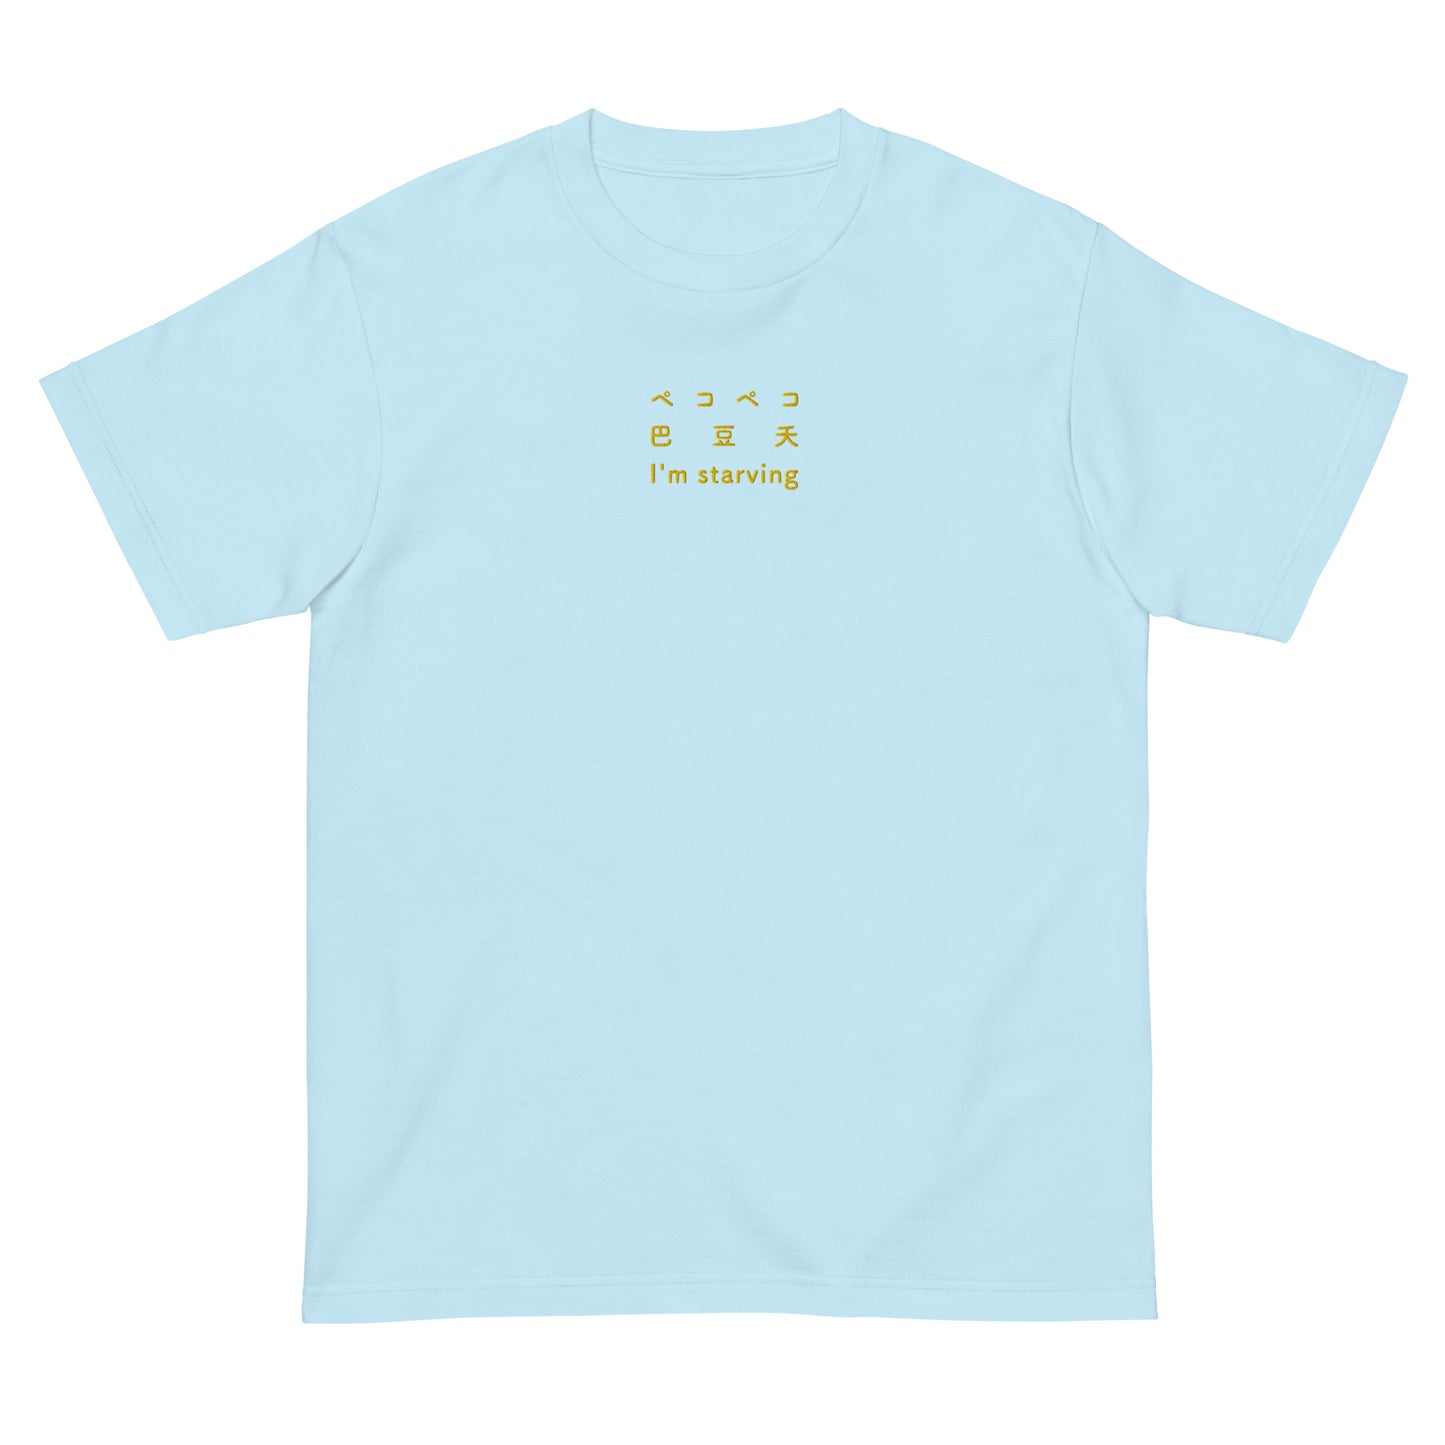 Light Blue High Quality Tee - Front Design with an Yellow Embroidery "I'm Starving" in three languages